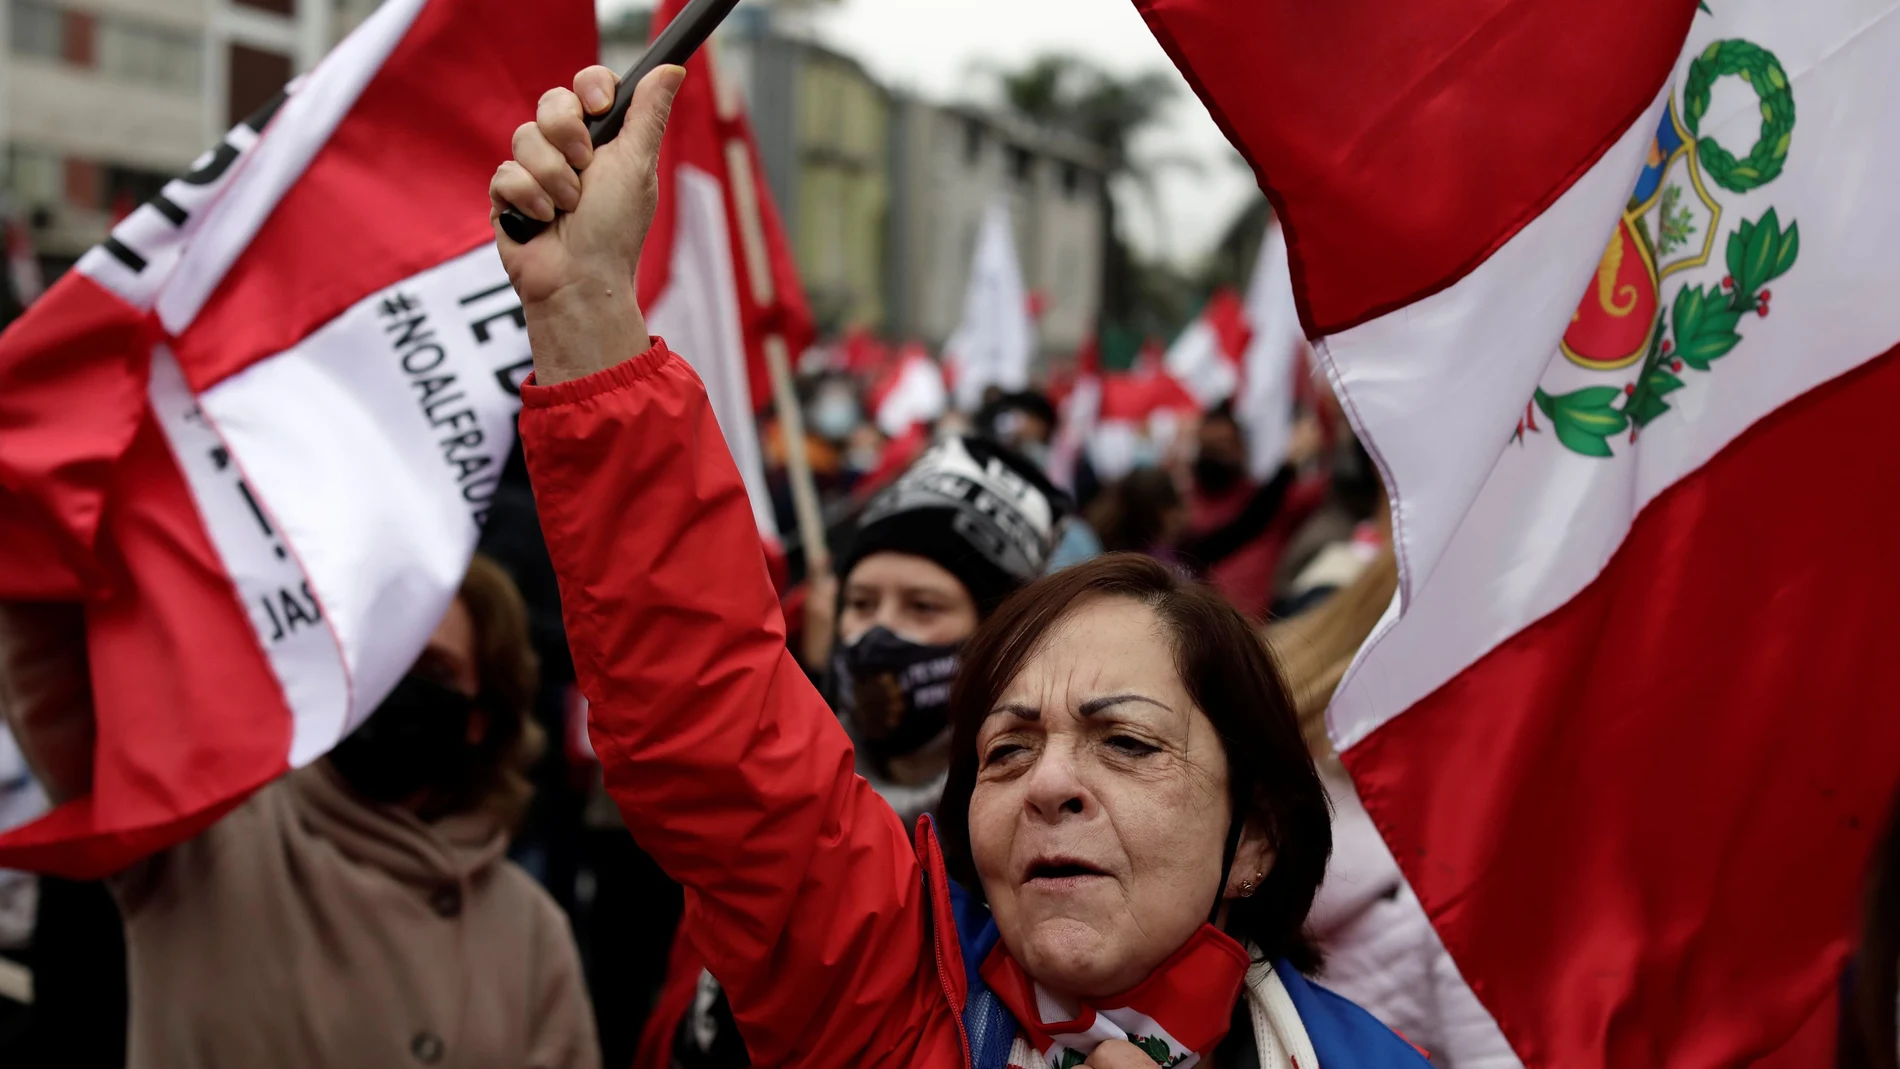 People participate in a protest against communism and Peru's new government led by President Pedro Castillo, a self-described Marxist-Leninist, in Lima, Peru August 1, 2021. REUTERS/Angela Ponce